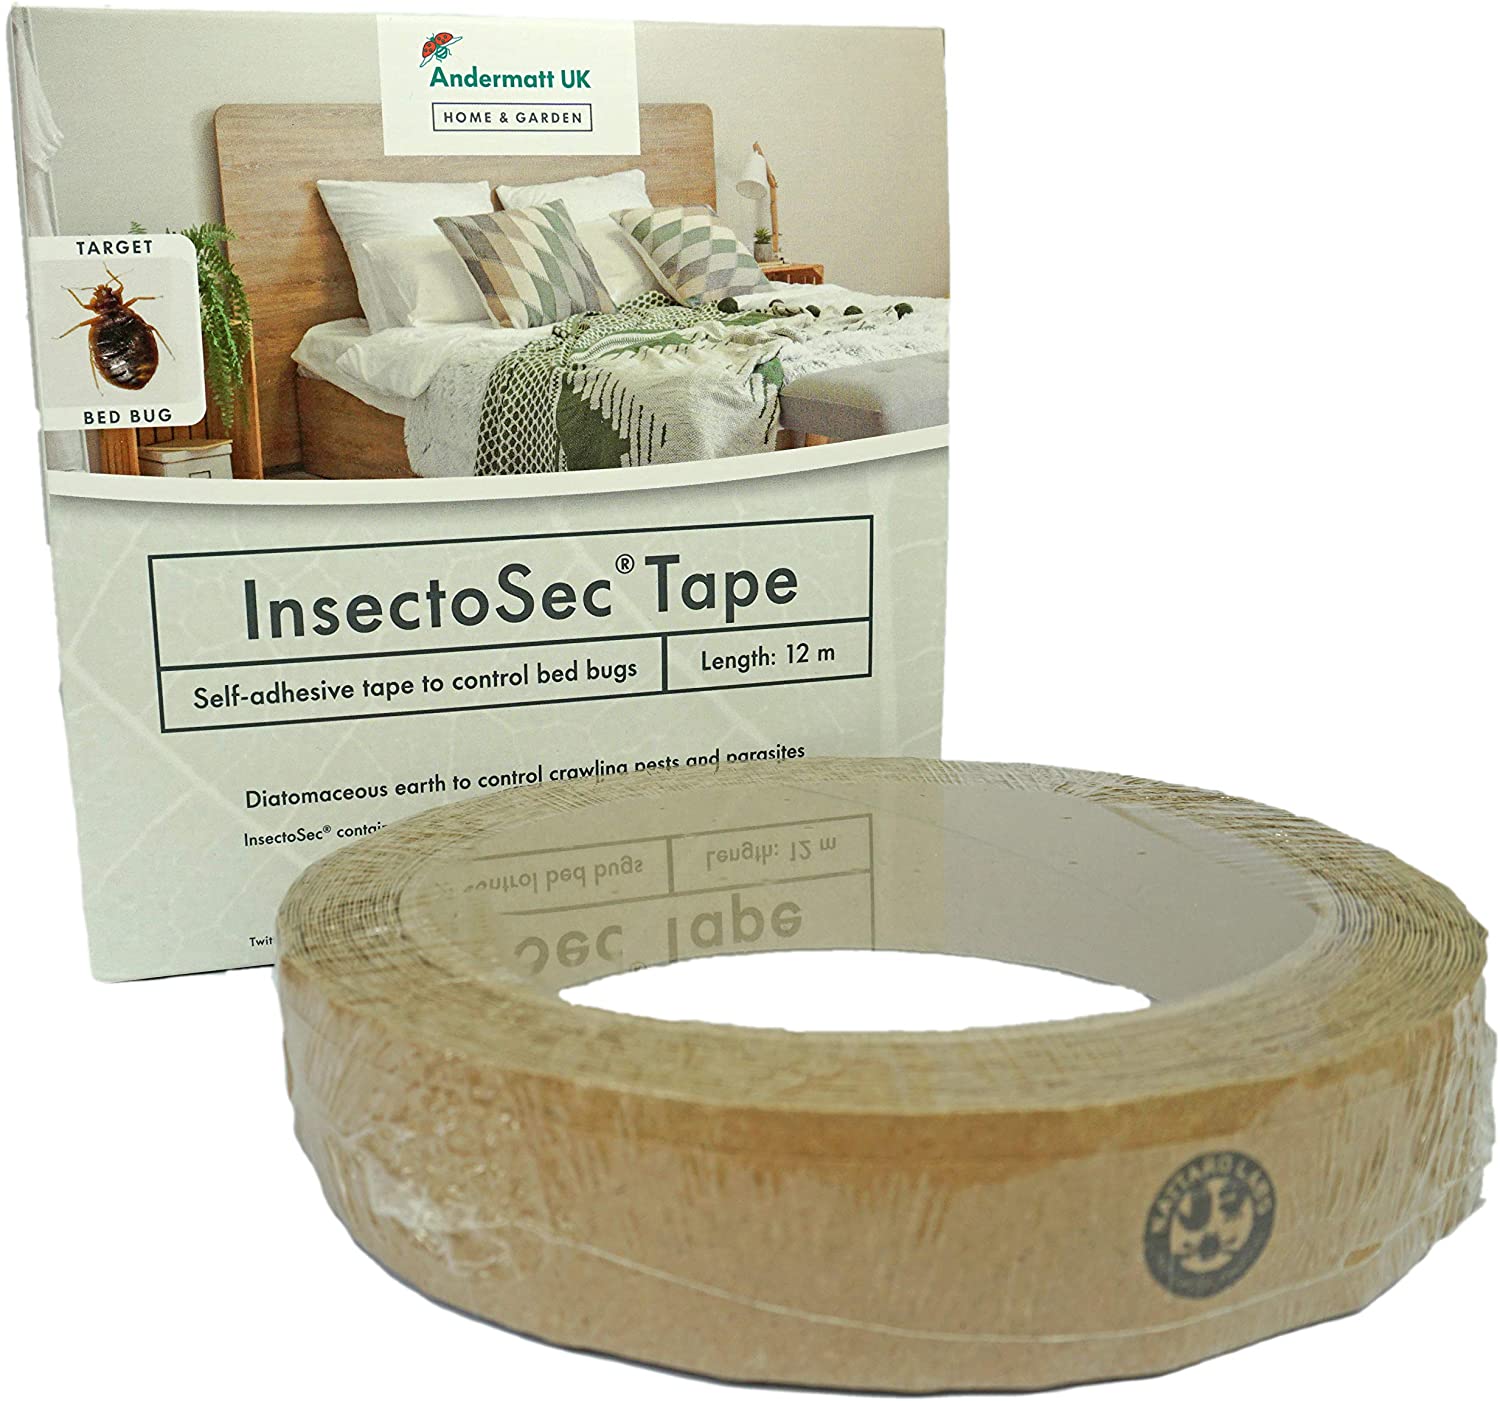 Photo of the InsectoSec Tape packaging and self-adhesive tape.